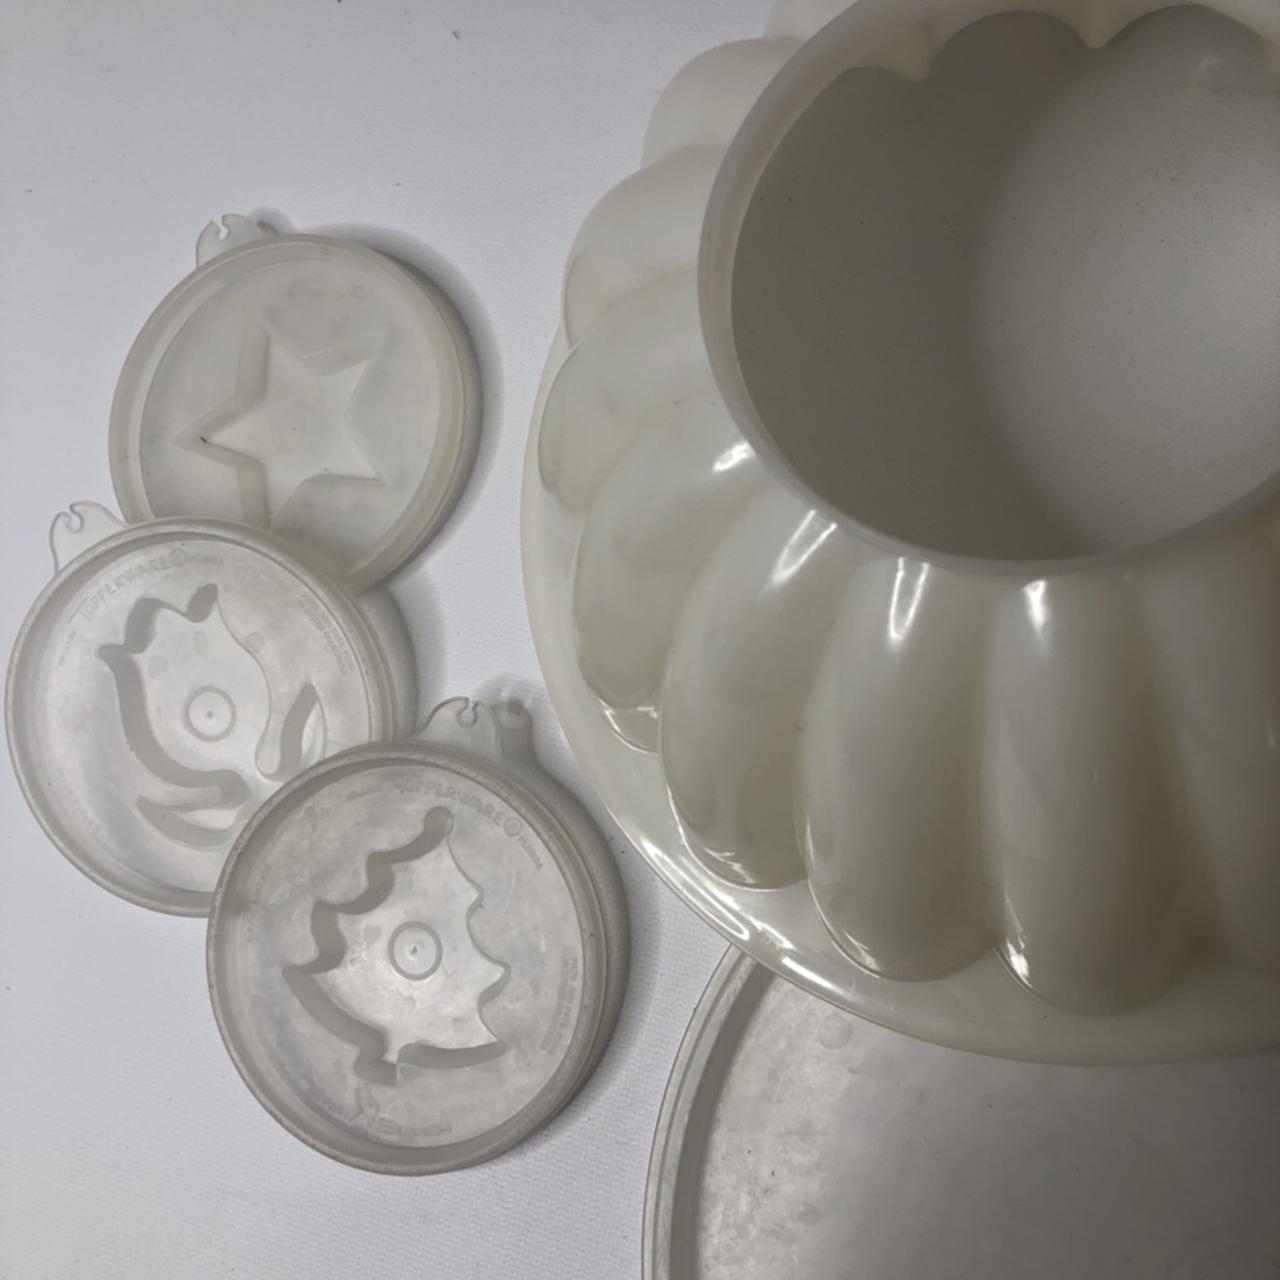 Vintage Tupperware Jell-o Mold 3 Changeable Lids